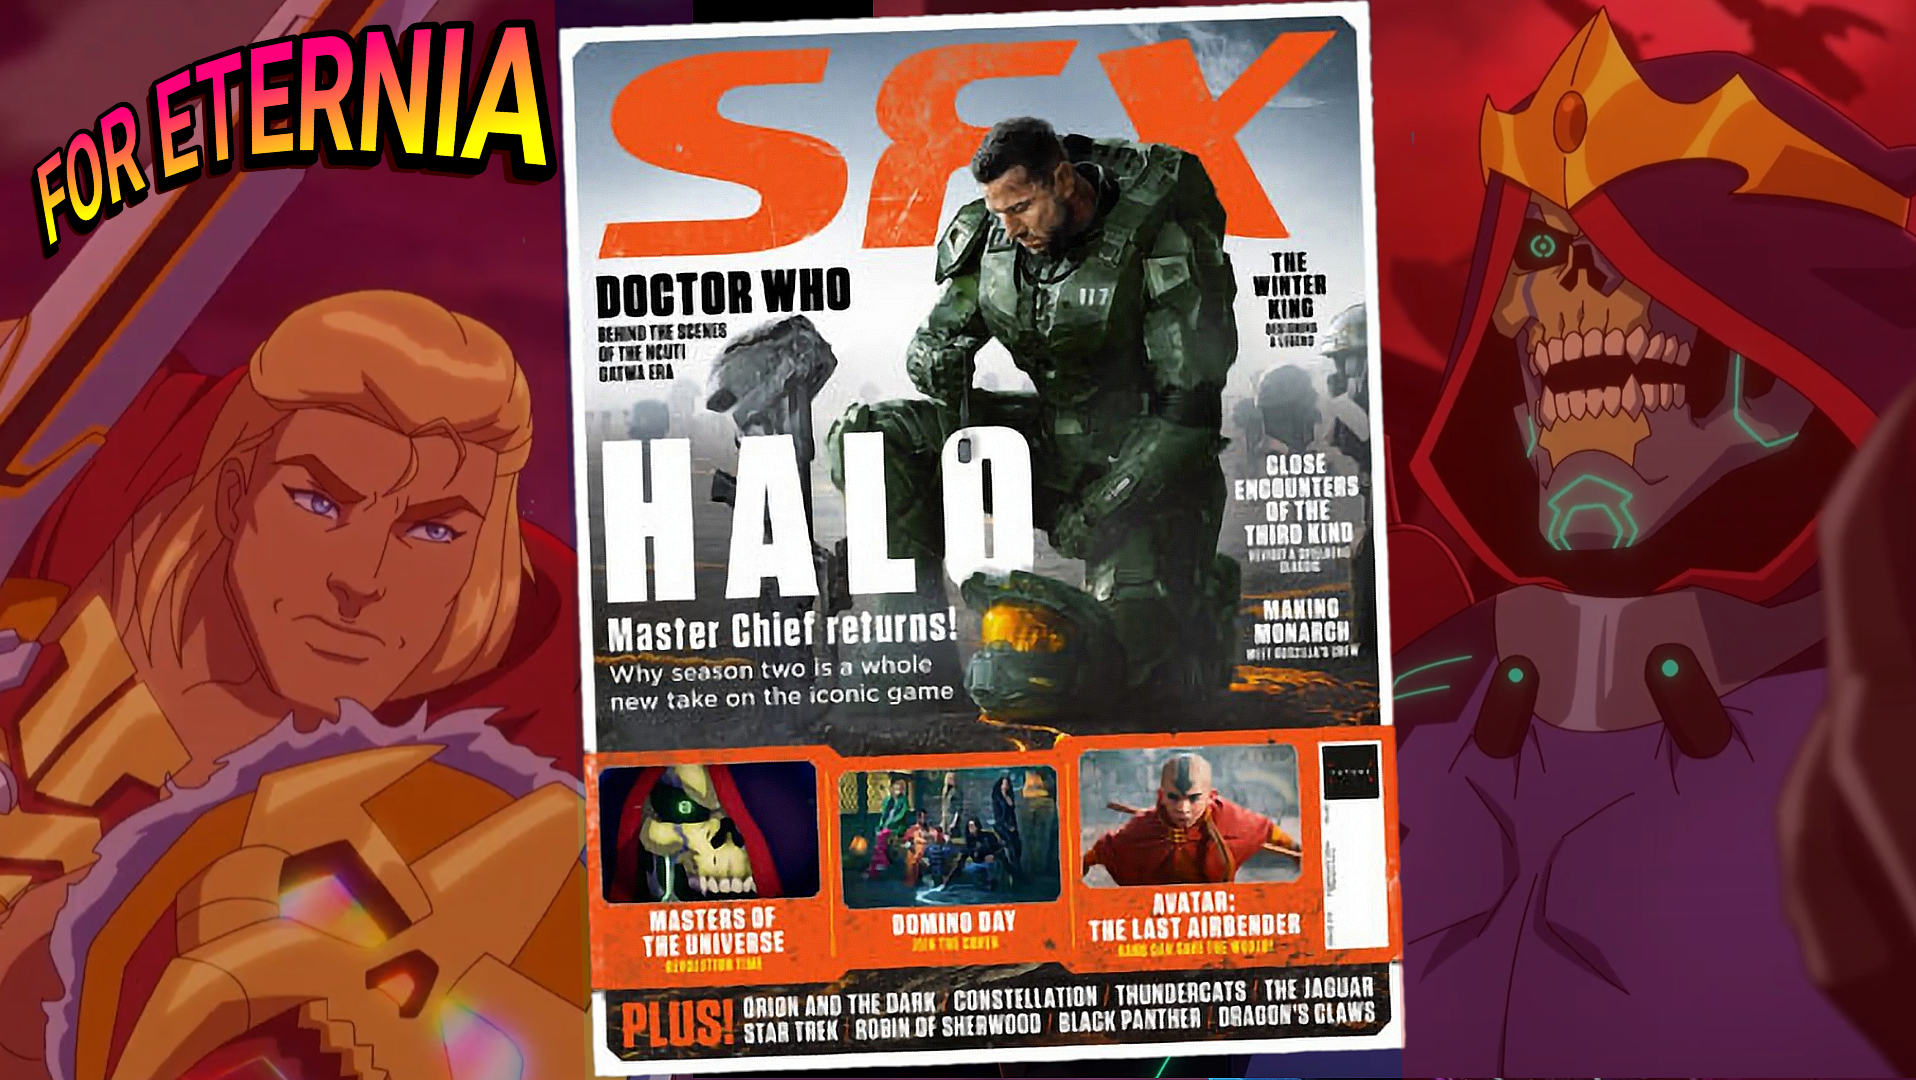 ”Masters of the Universe: Revolution” lands on the cover of the latest issue of SFX Magazine!